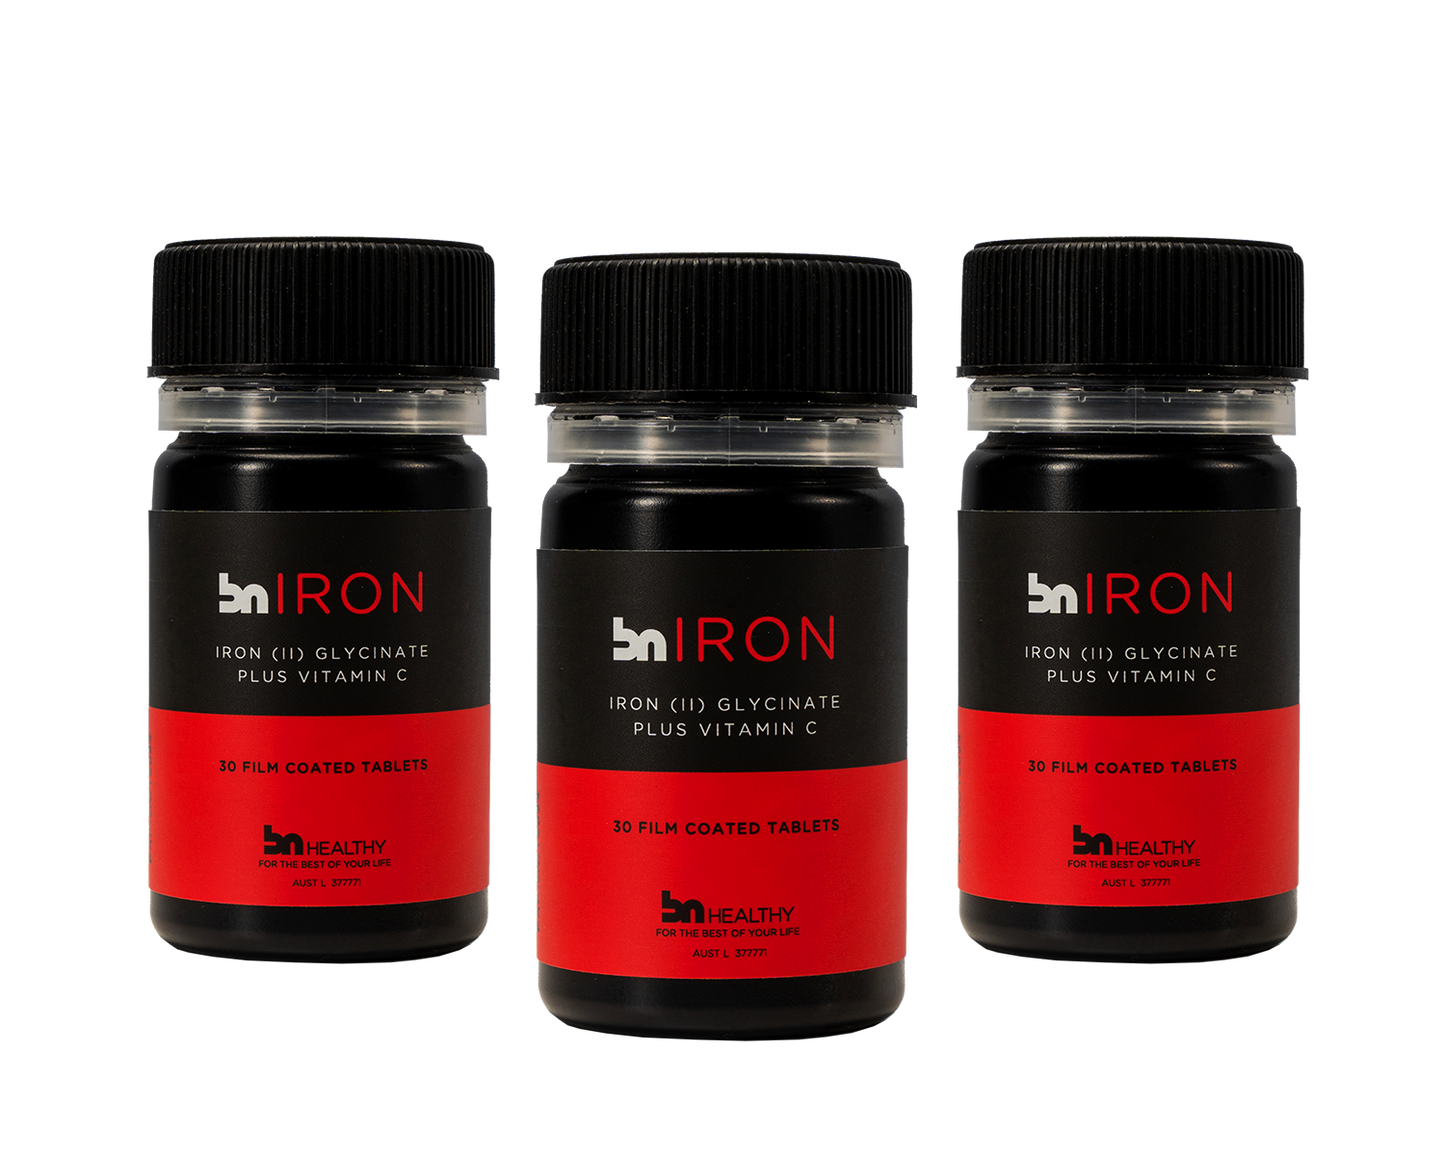 BN Iron - Iron Tablets + Vitamin C - 3 Month Subscription - Save 20%